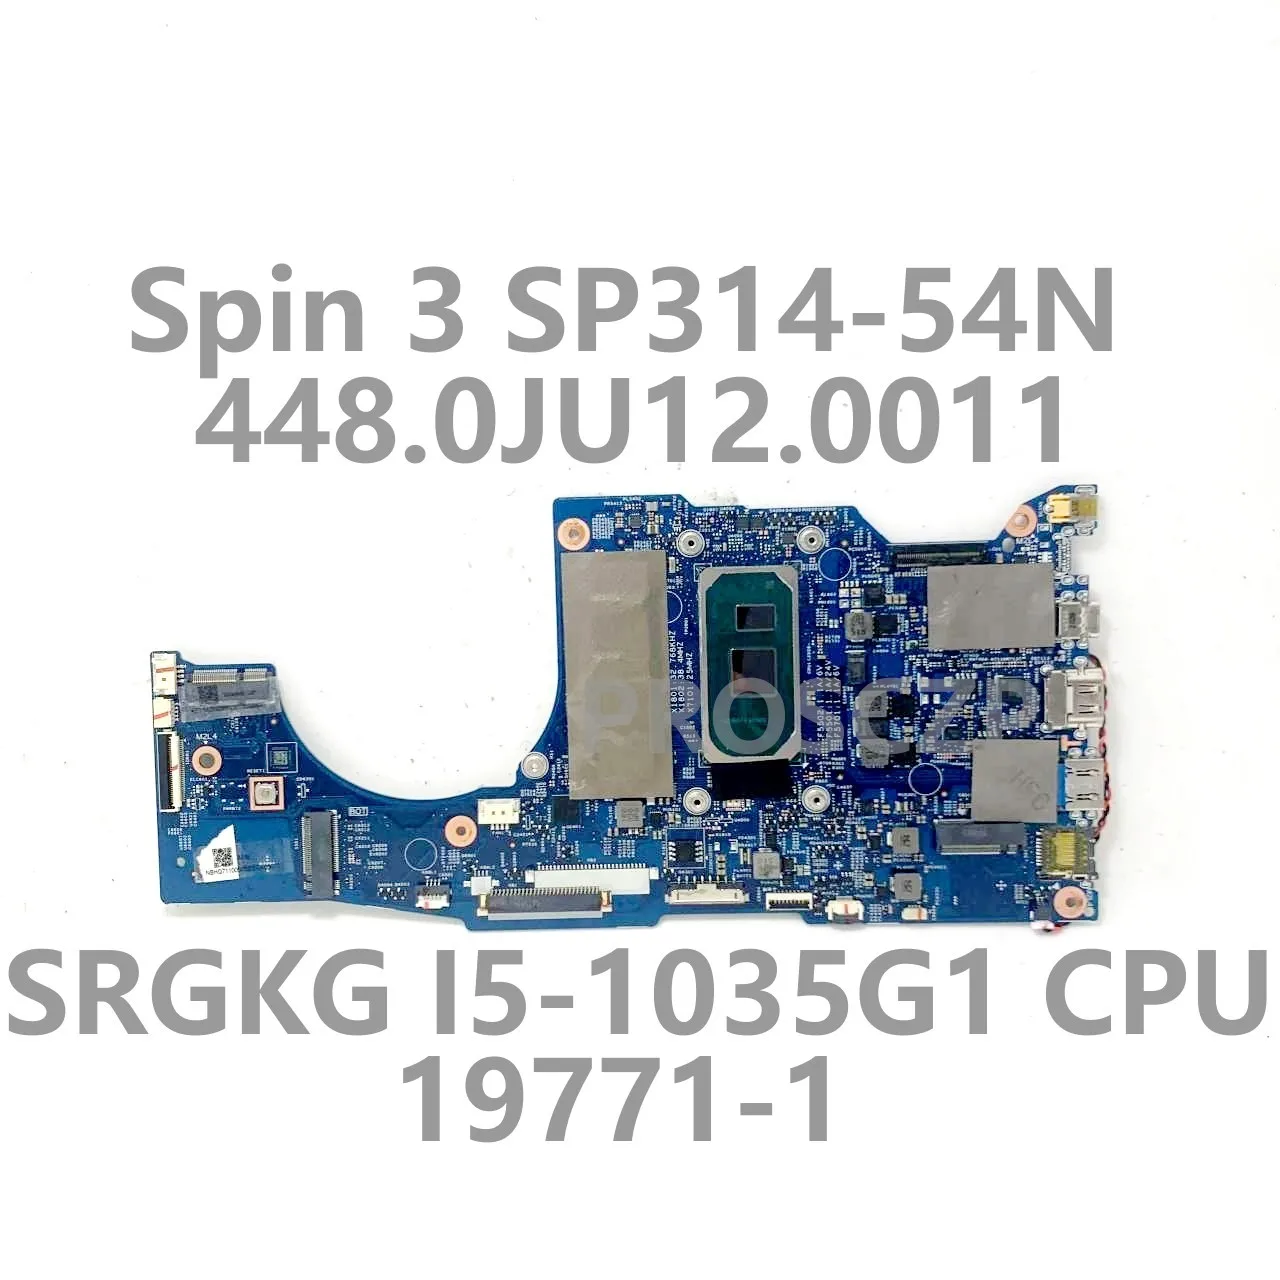 

448.0JU12.0011 19771-1 For Acer Spin 3 SP314-54N Laptop Motherboard With SRGKG I5-1035G1 CPU 100% Tested Working Well